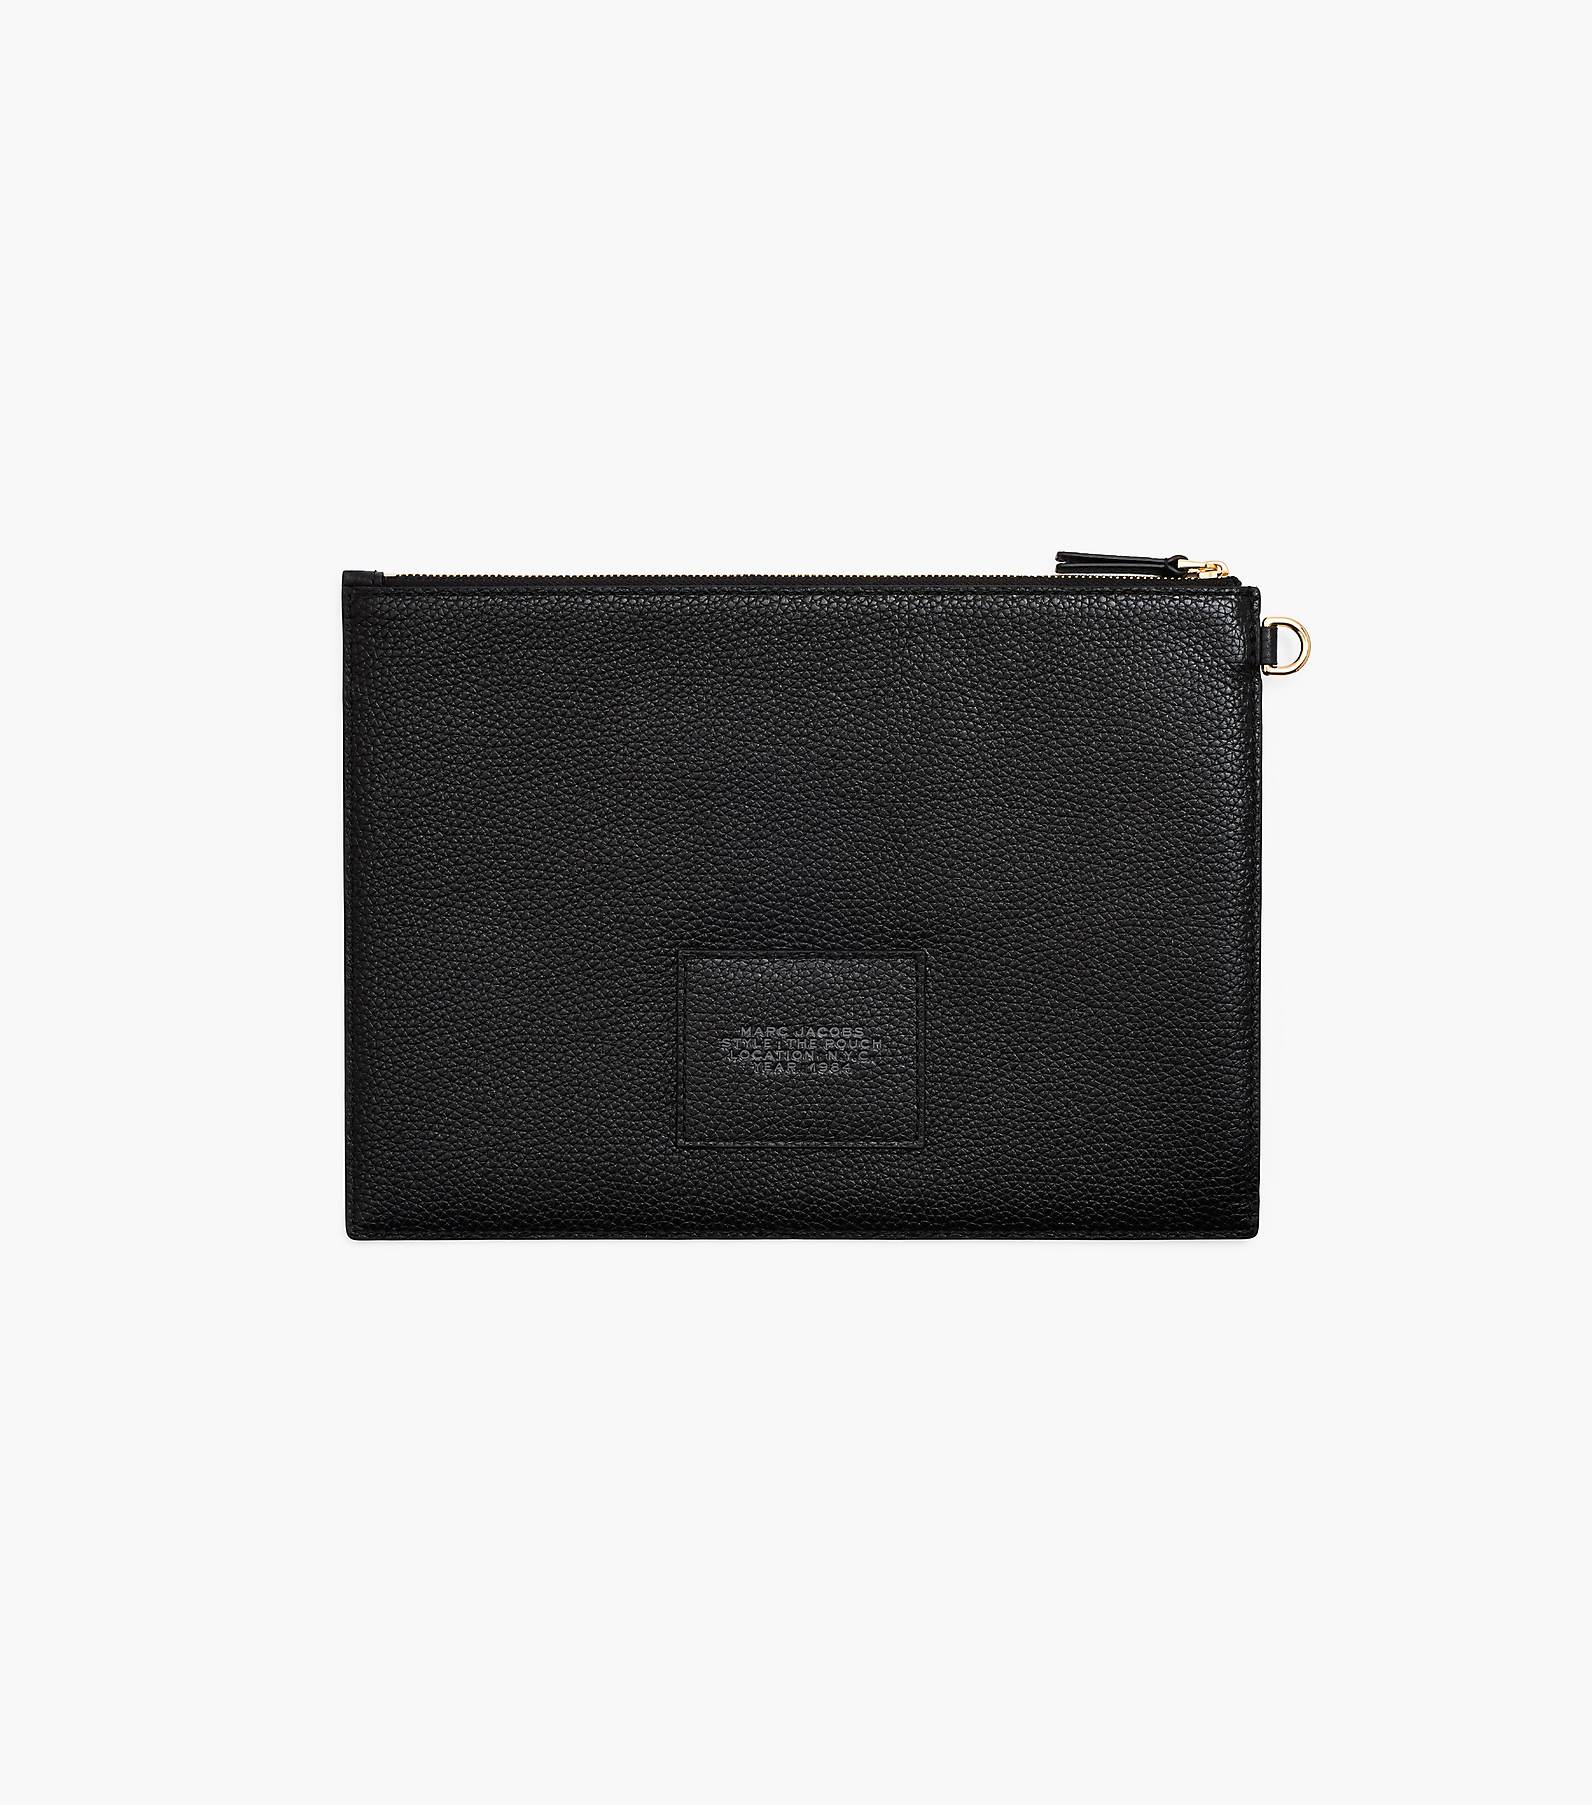 The Leather Large Pouch